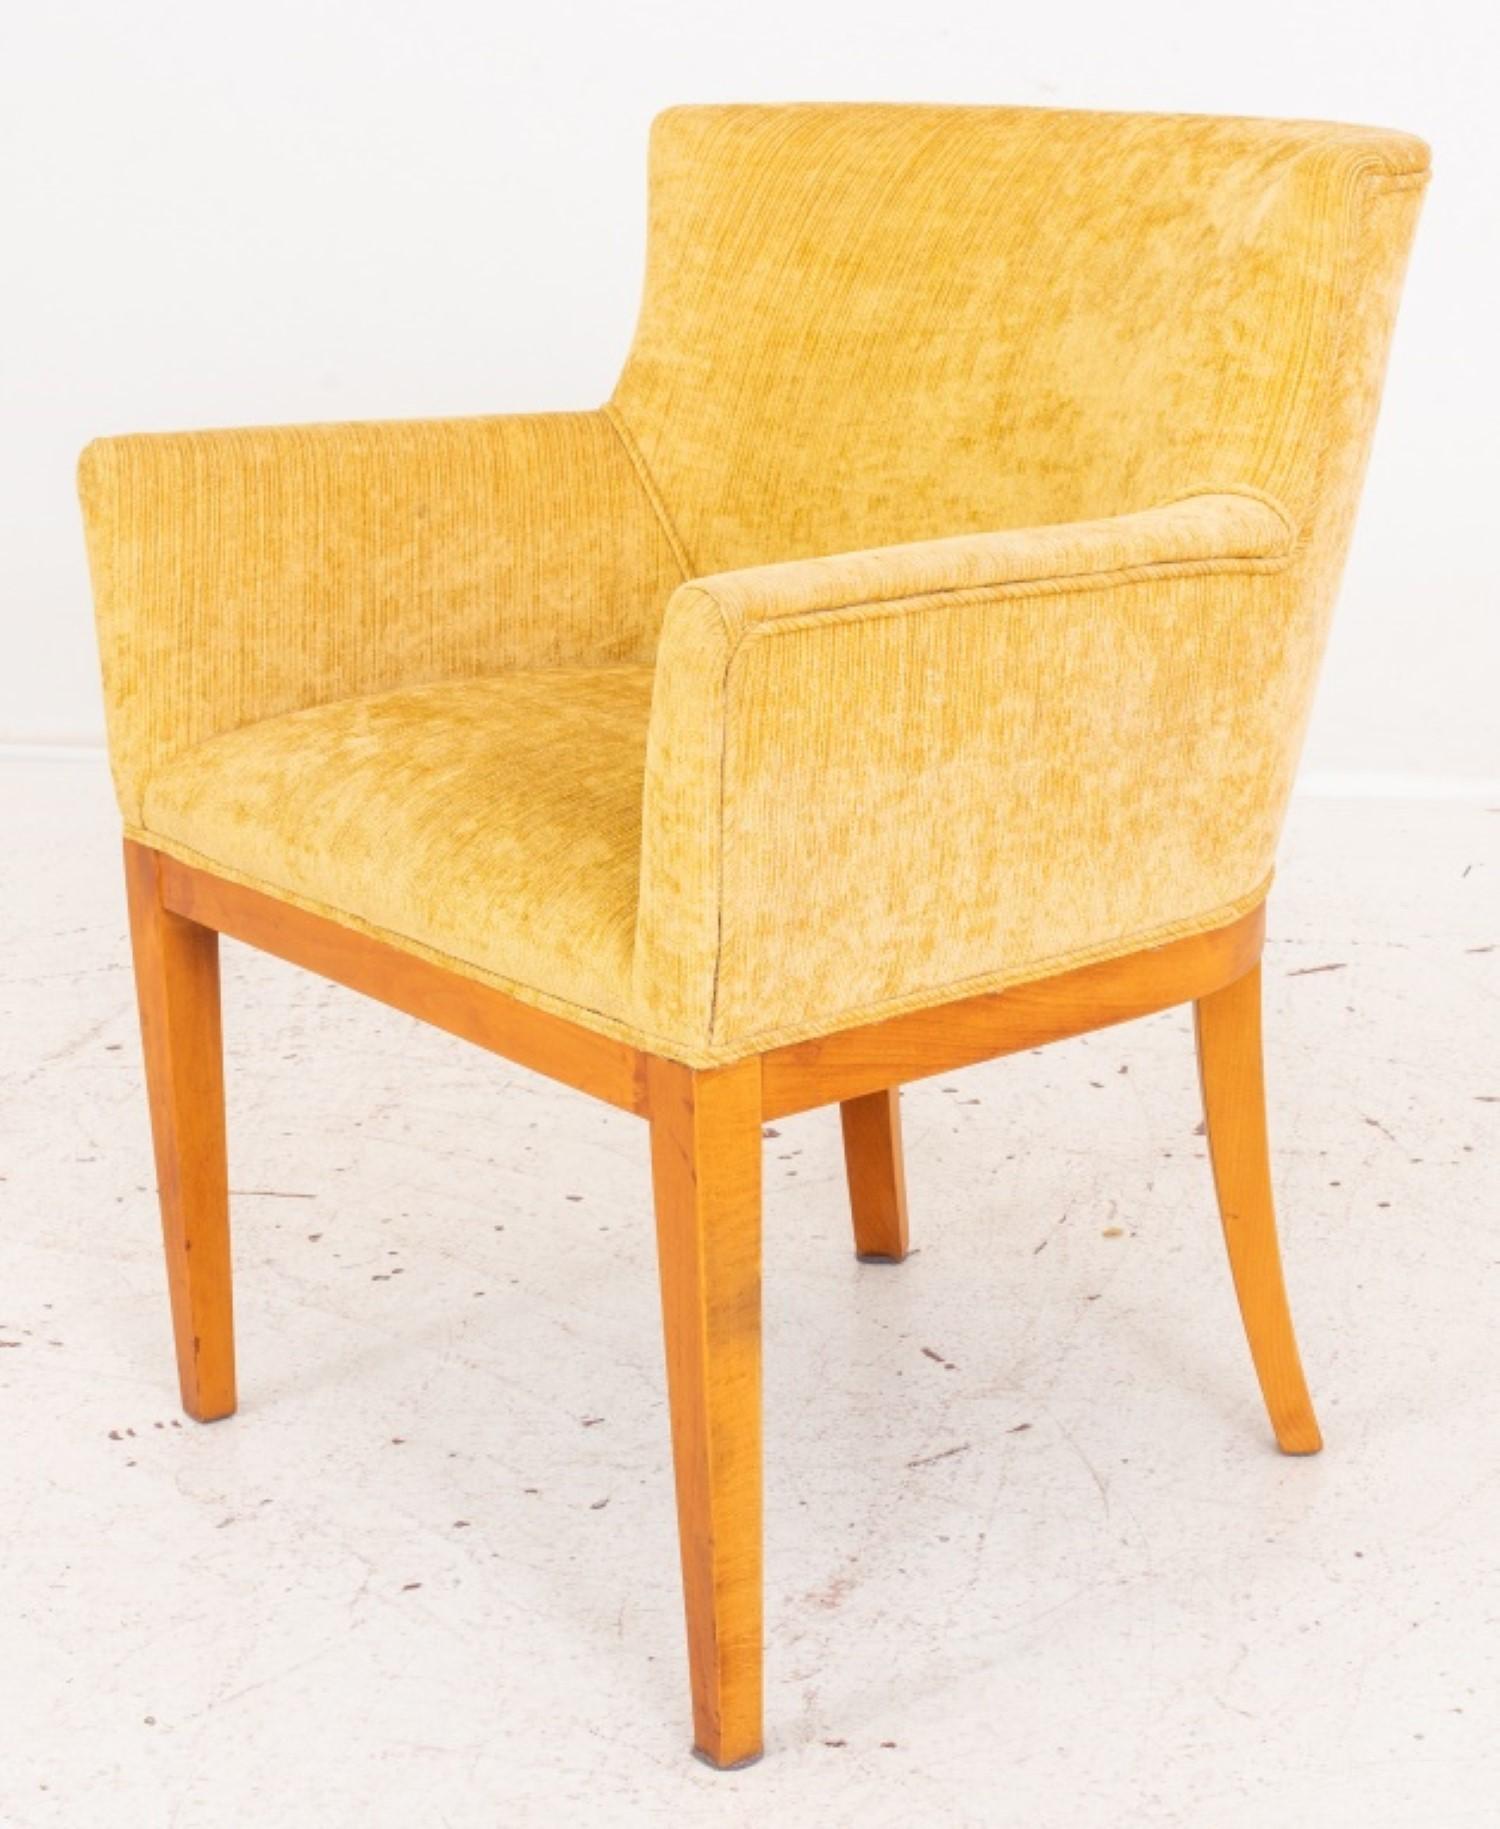 Upholstery Modern Upholstered Birch Arm Chairs, 2